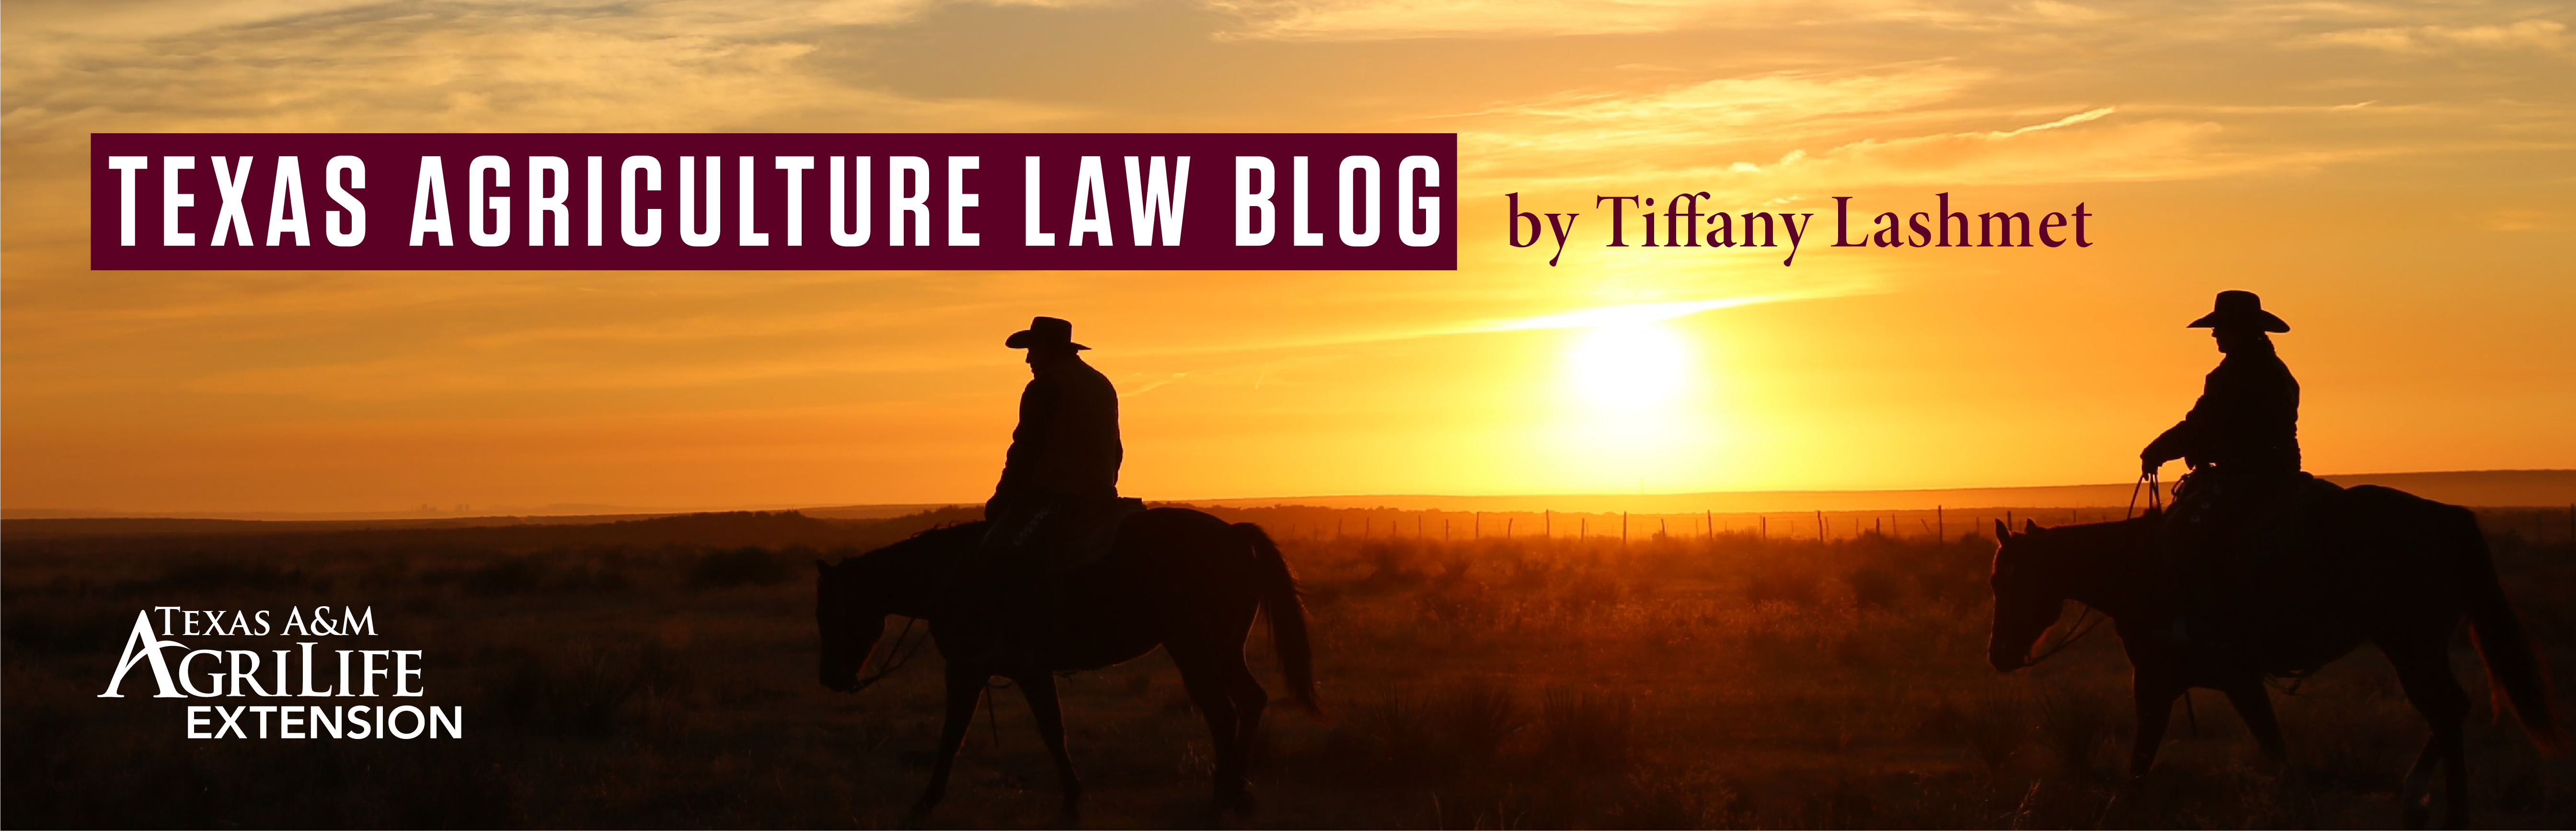 Texas Agriculture Law